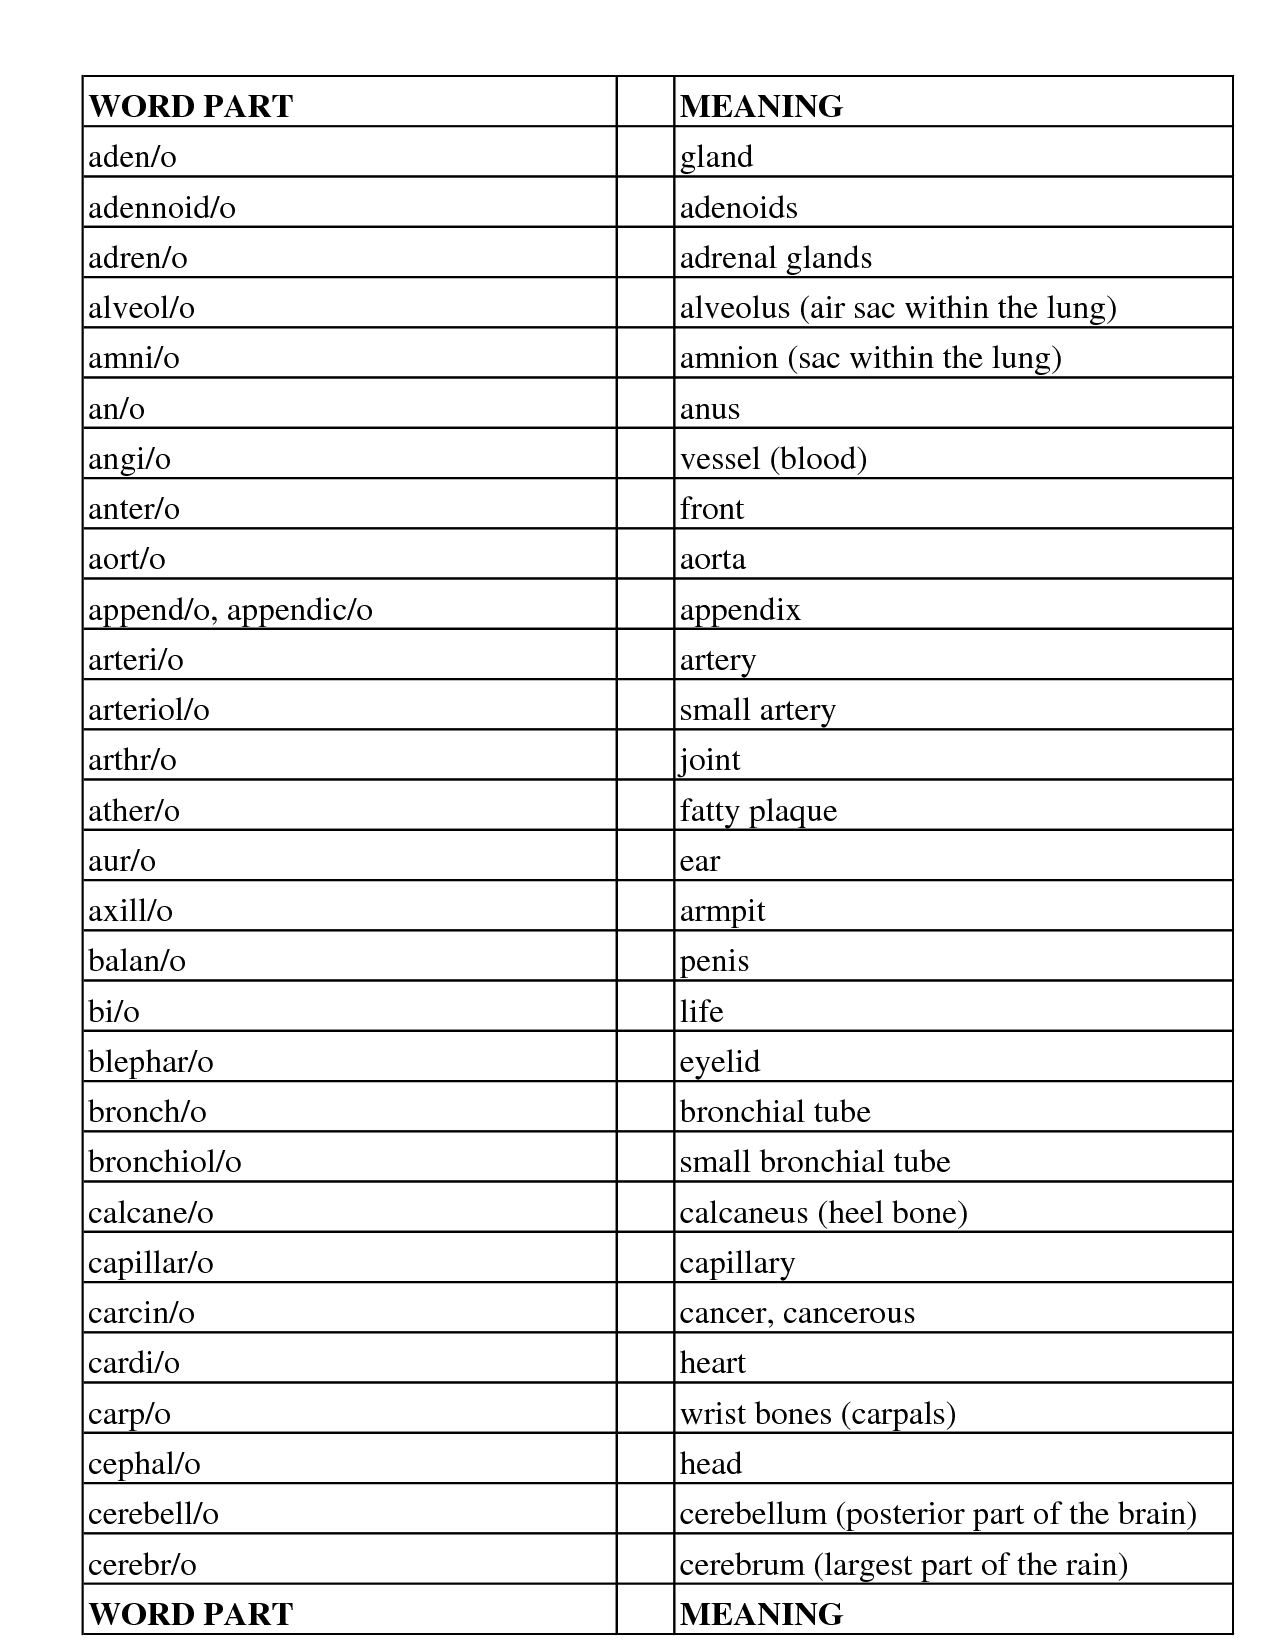 Prefixes and Suffixes Meanings Image